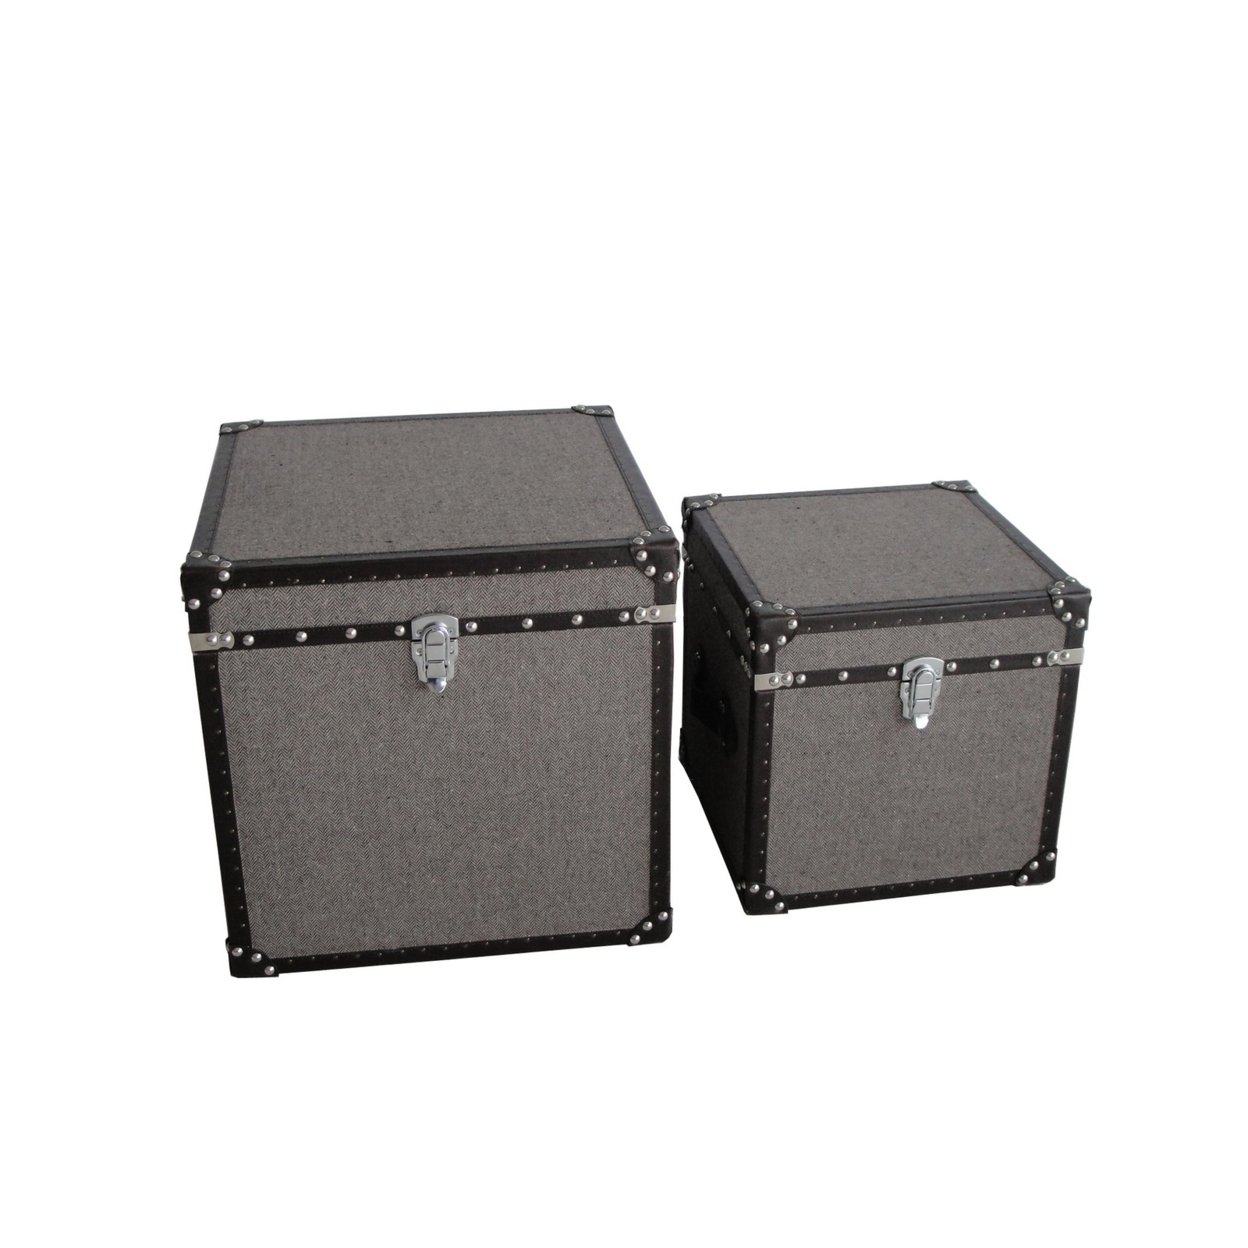 Fabric Upholstered Square Trunk With Nailhead Details, Gray, Set Of 2- Saltoro Sherpi